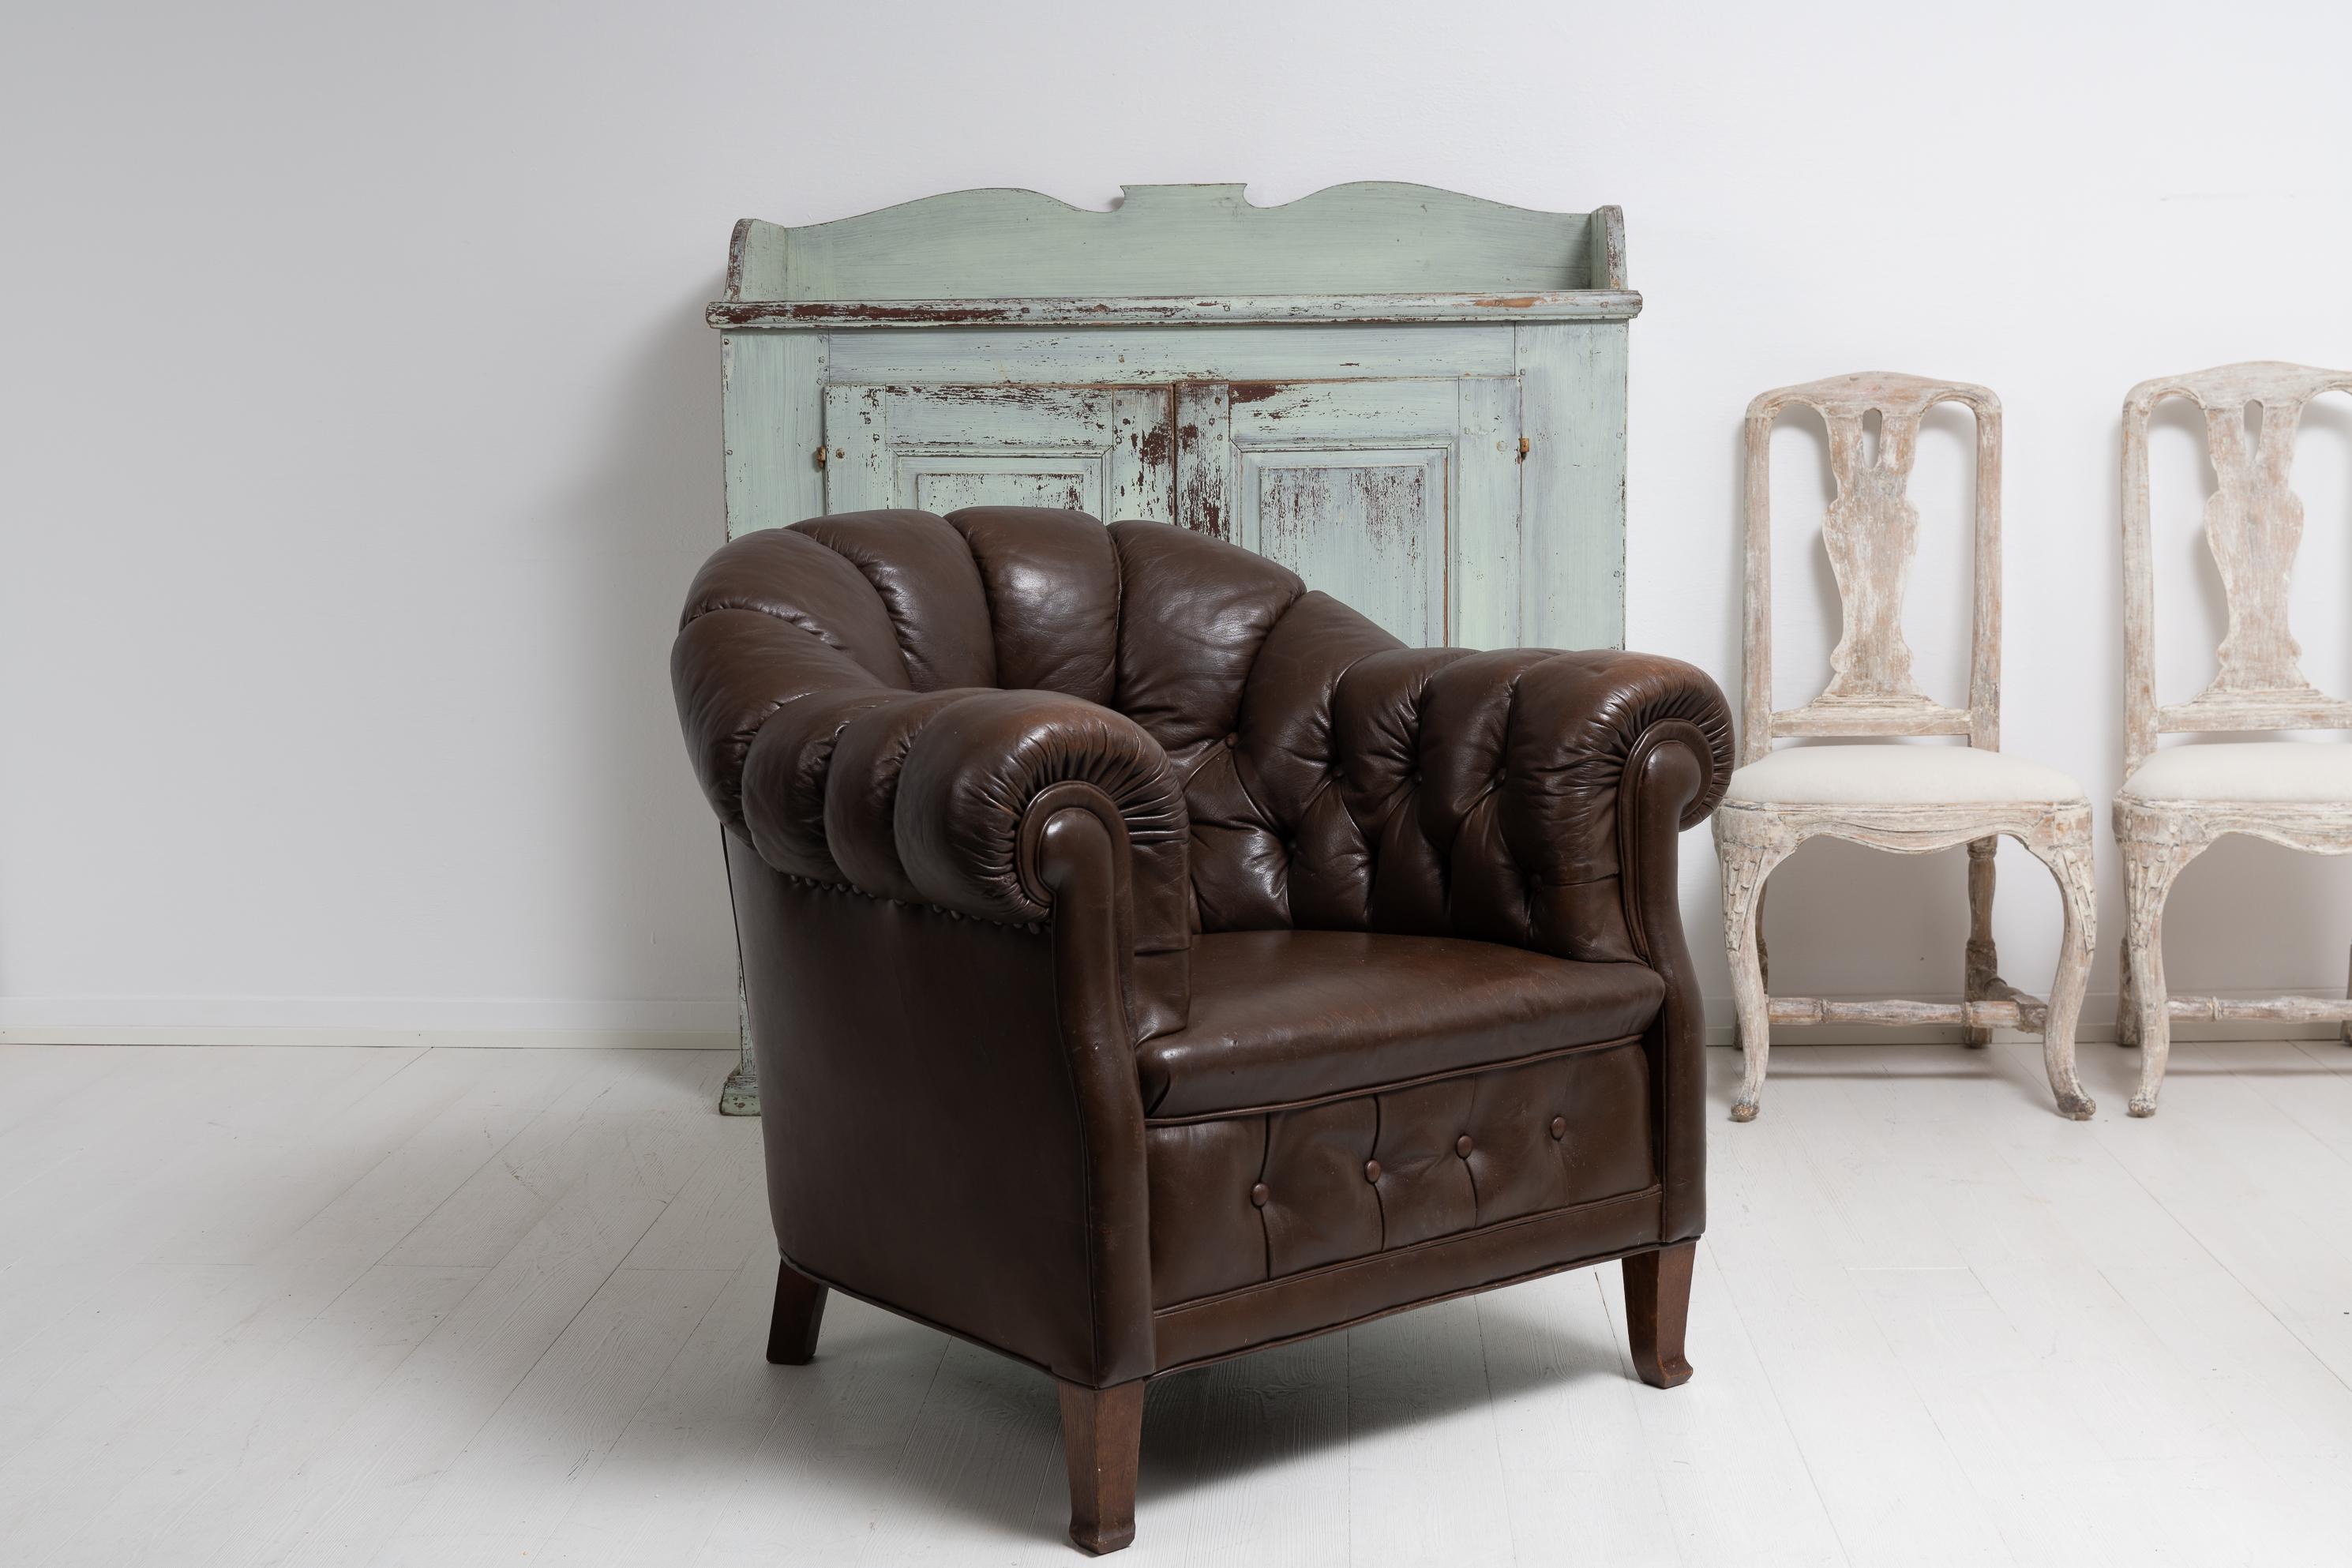 Early 20th century brown leather Chesterfield armchair from Sweden made. The chair is large and generous with the original leather and the patina of time only 100 years of use can create. It is plush and sturdy with an authentic aged look to the